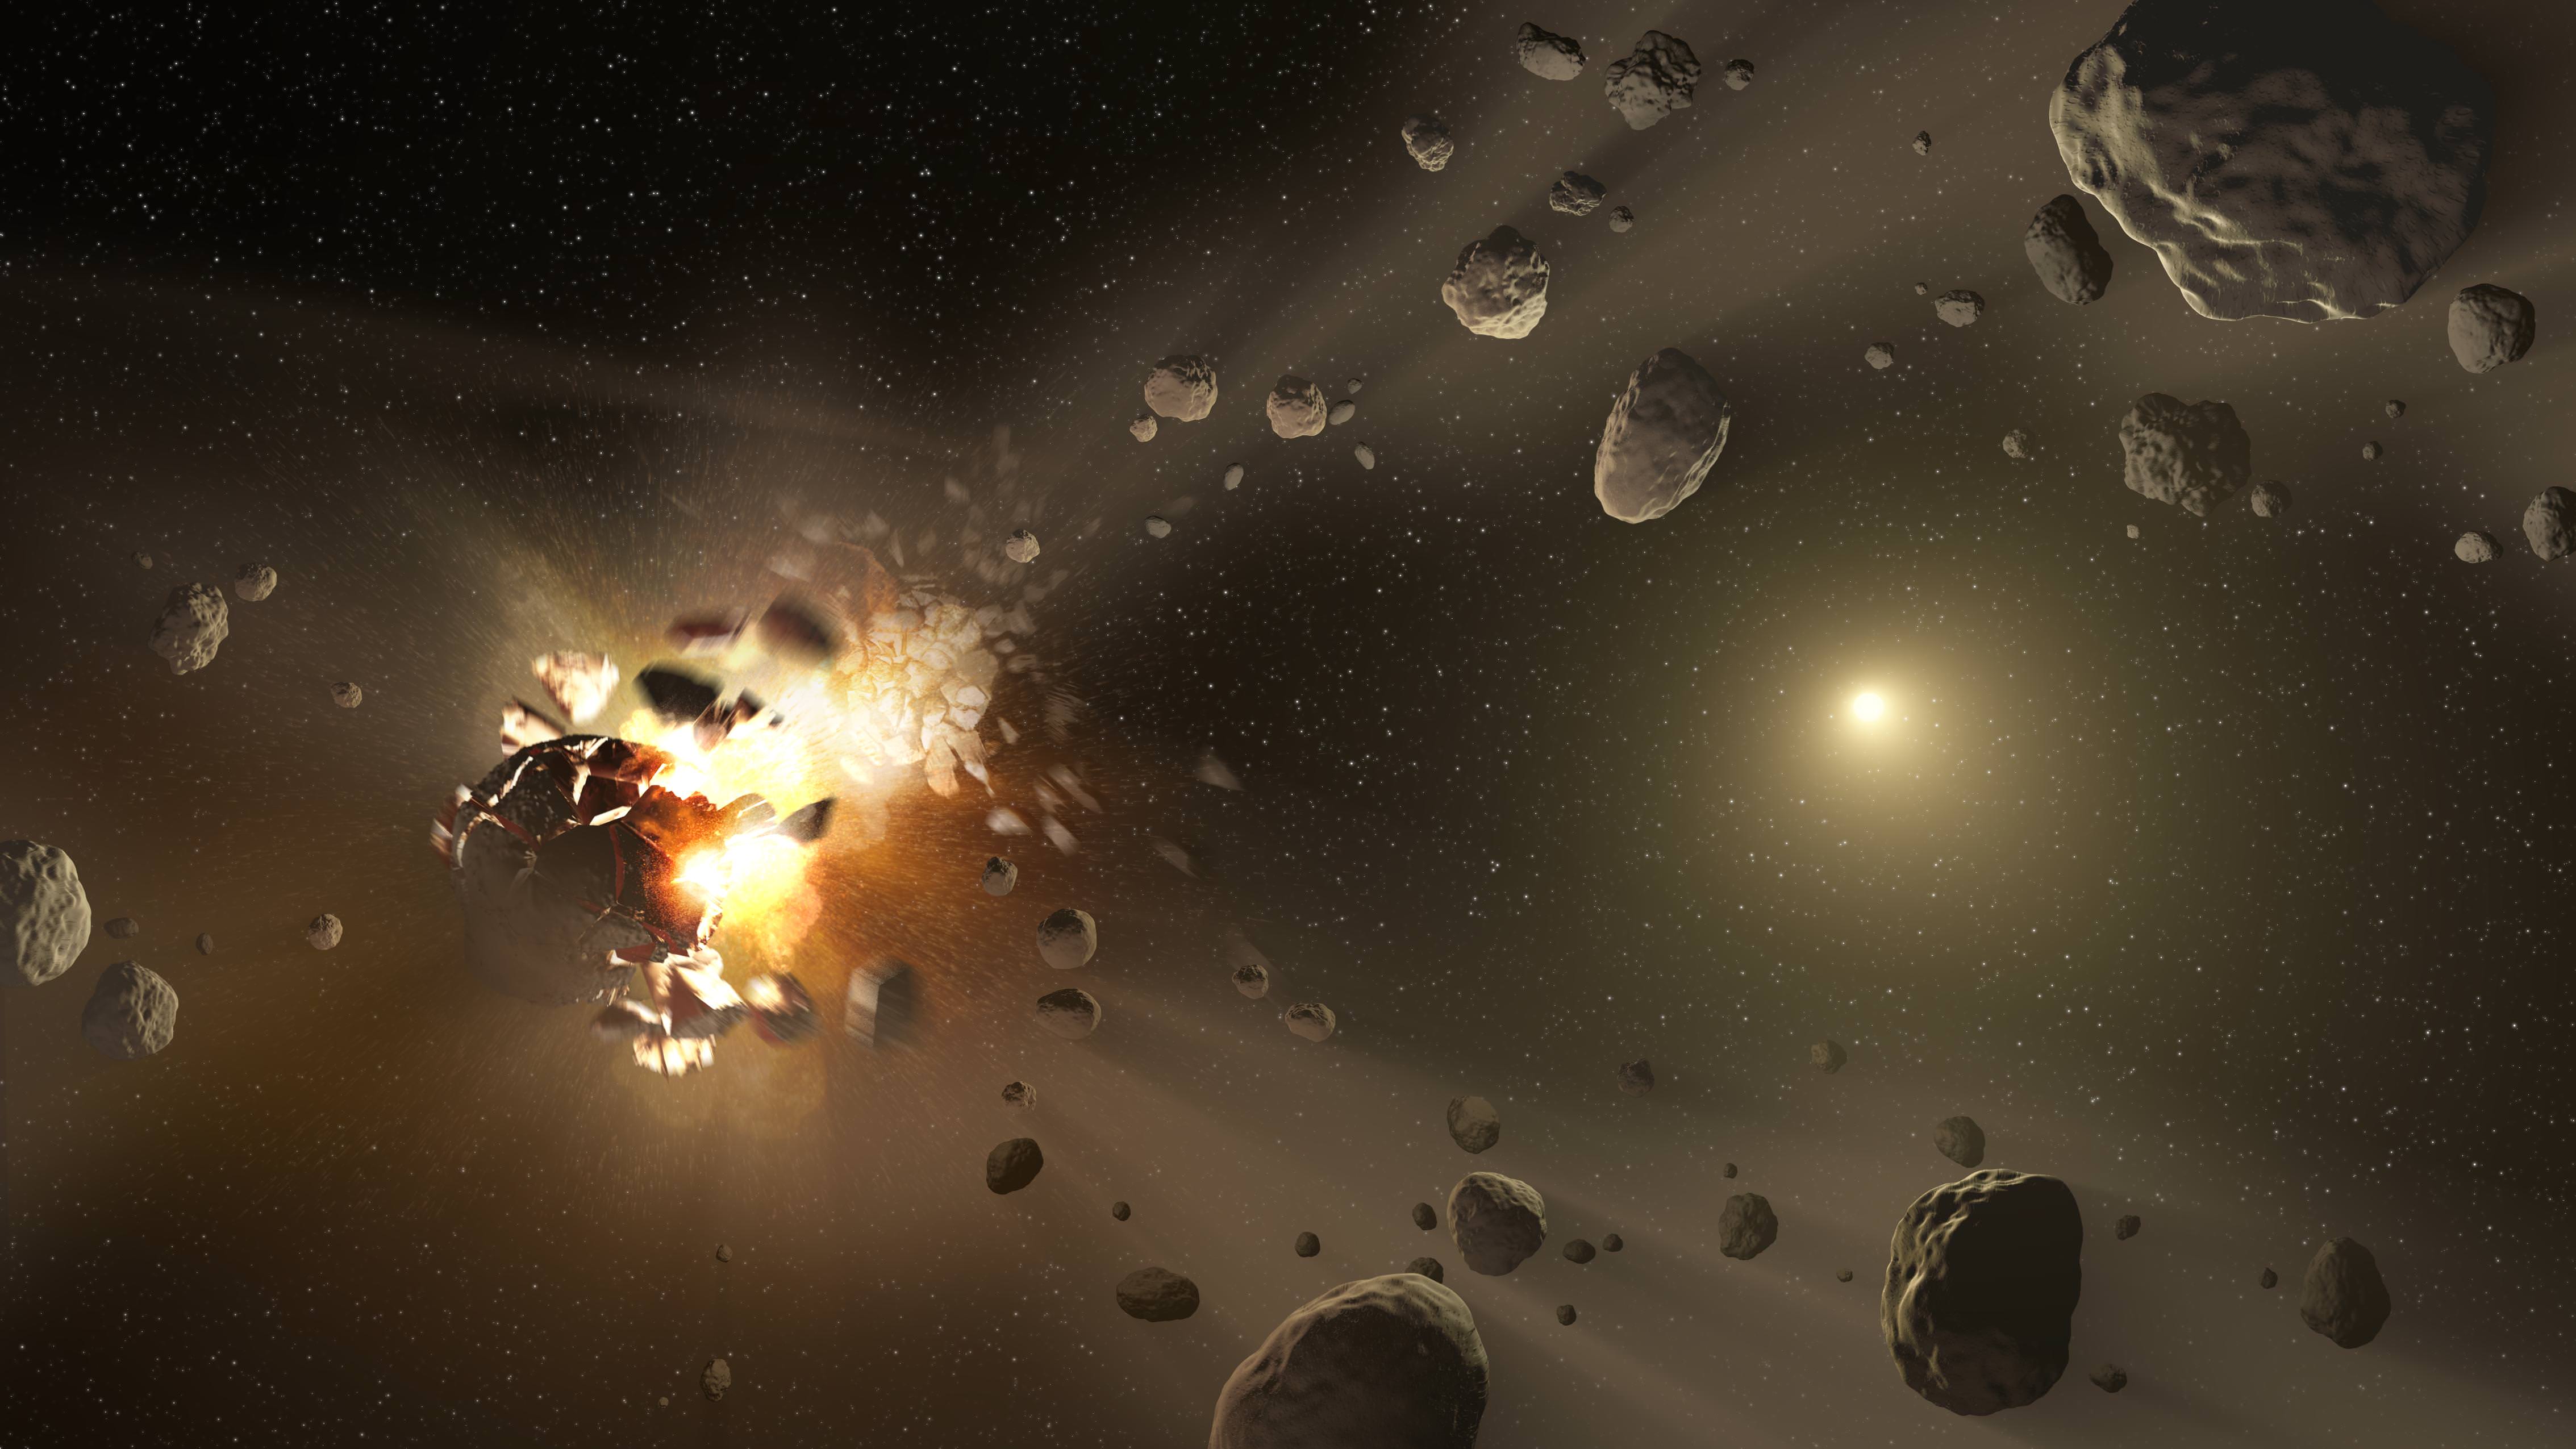 An artist's conception of an asteroid collision, which leads to how "families" of these space rocks are made in the belt between Mars and Jupiter. Credit: NASA/JPL-Caltech